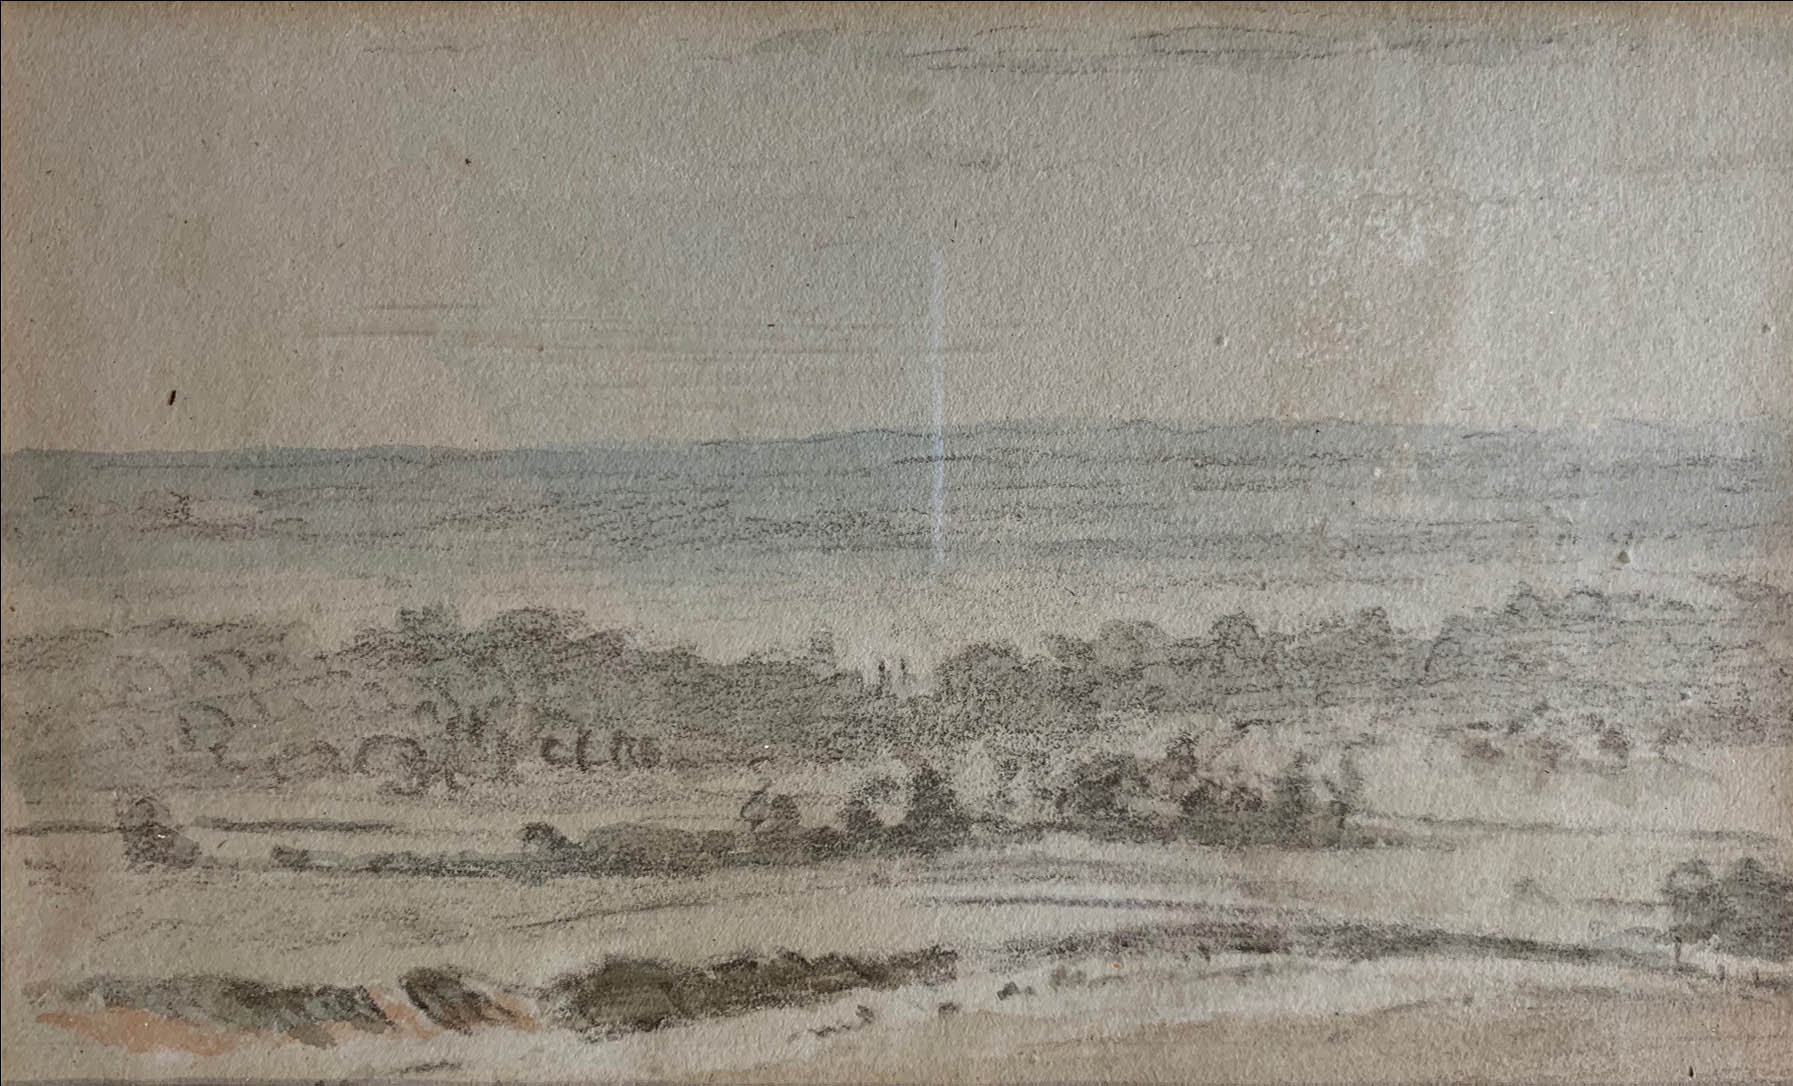 CIRCLE OF JOHN CONSTABLE, R.A., EAST BERGHOLT, 1776 - 1837, HAMPSTEAD, DRAWING ON BLUE PAPER